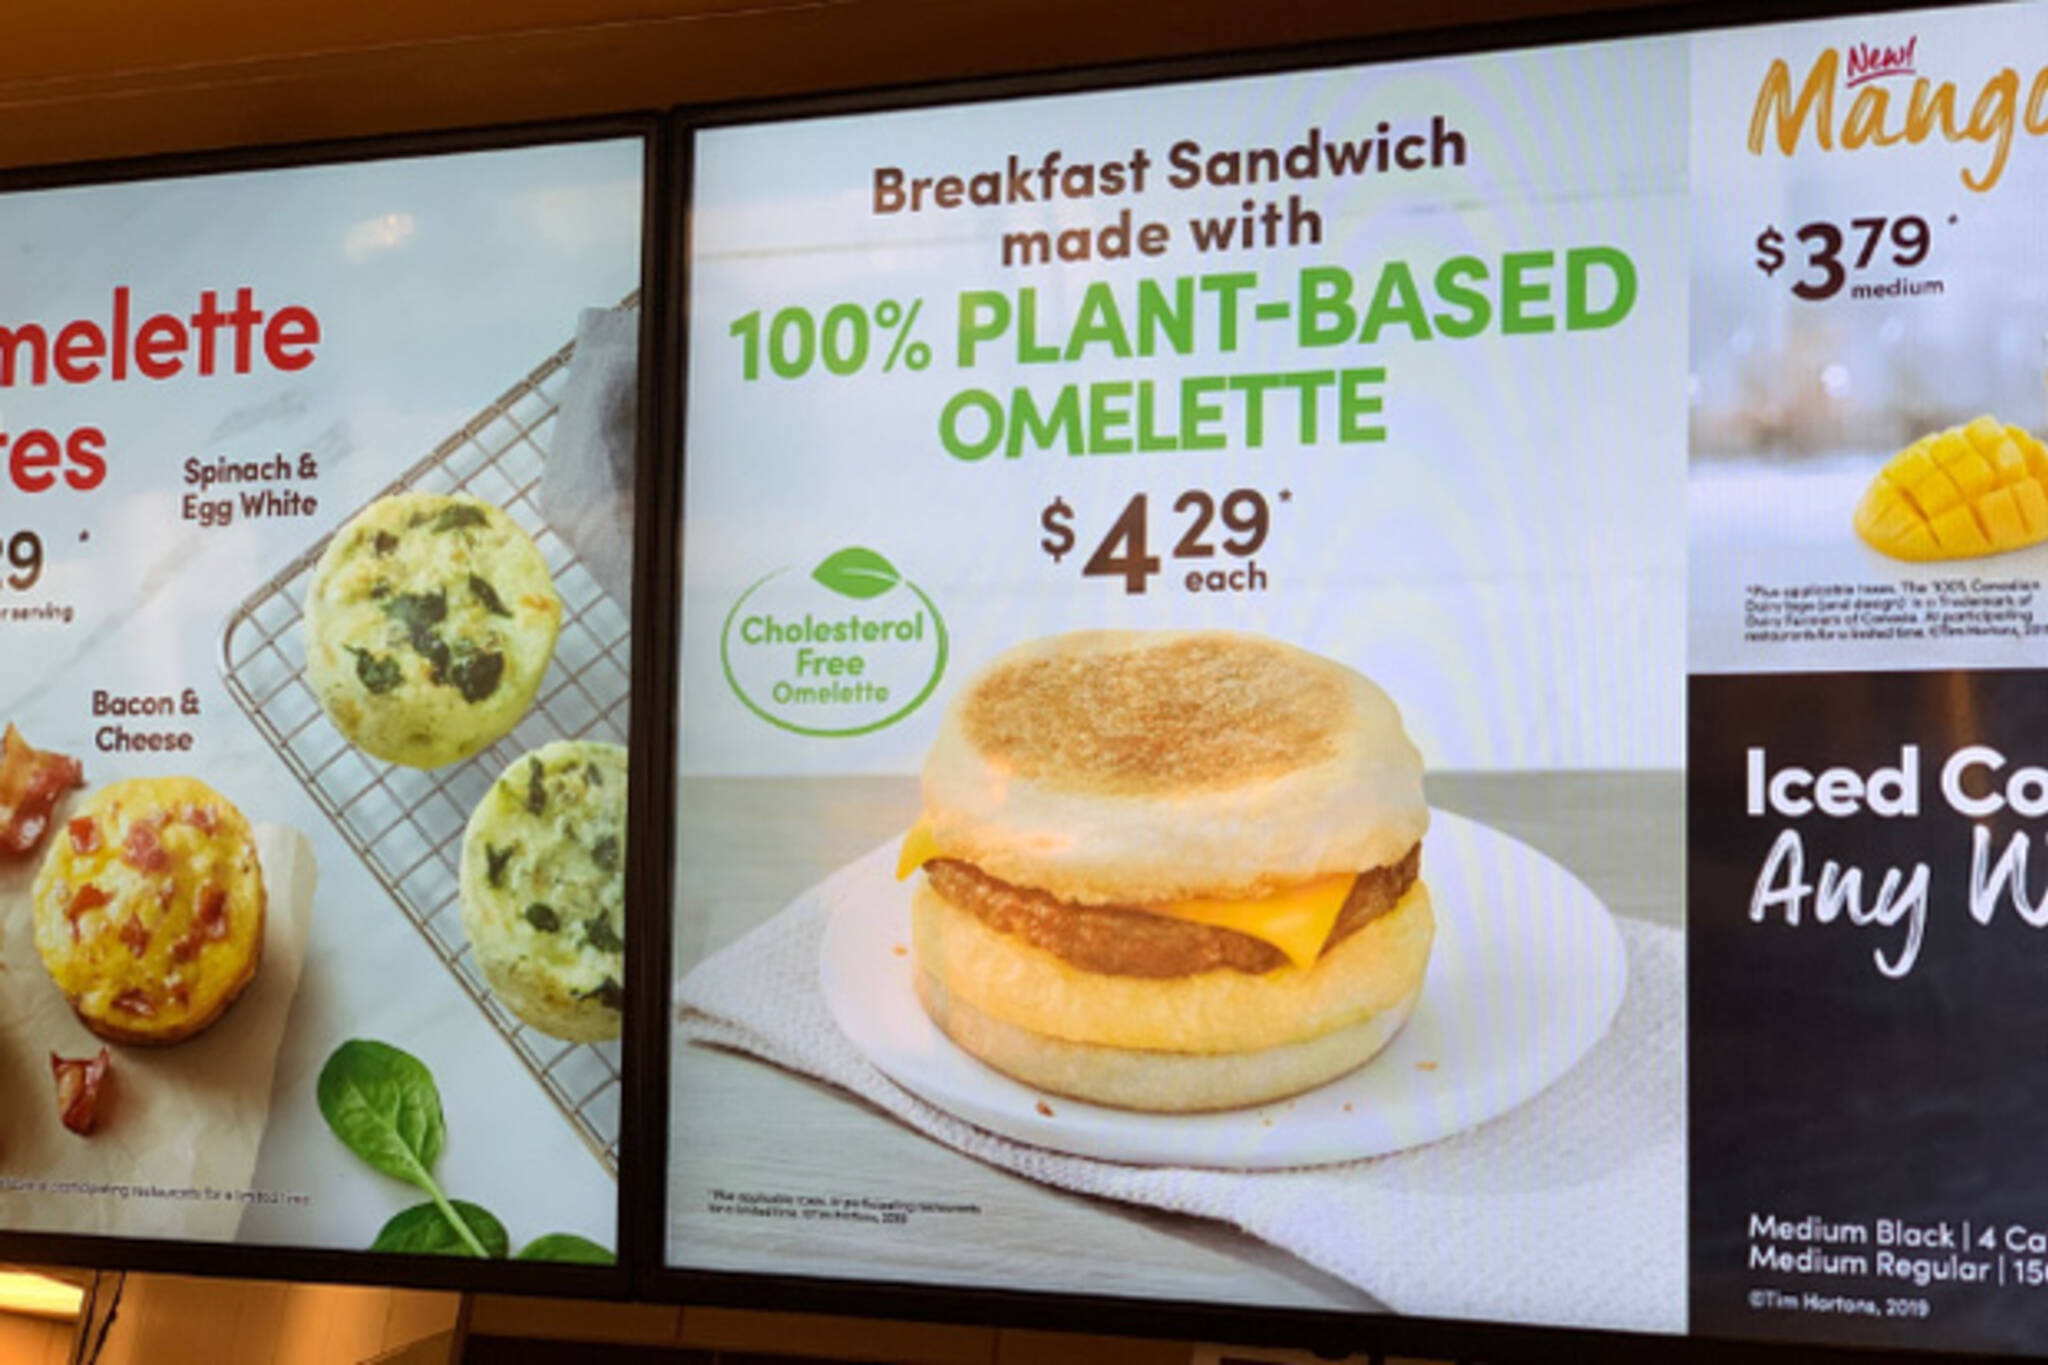 Check out this new Tim Hortons Breakfast Sandwich! 